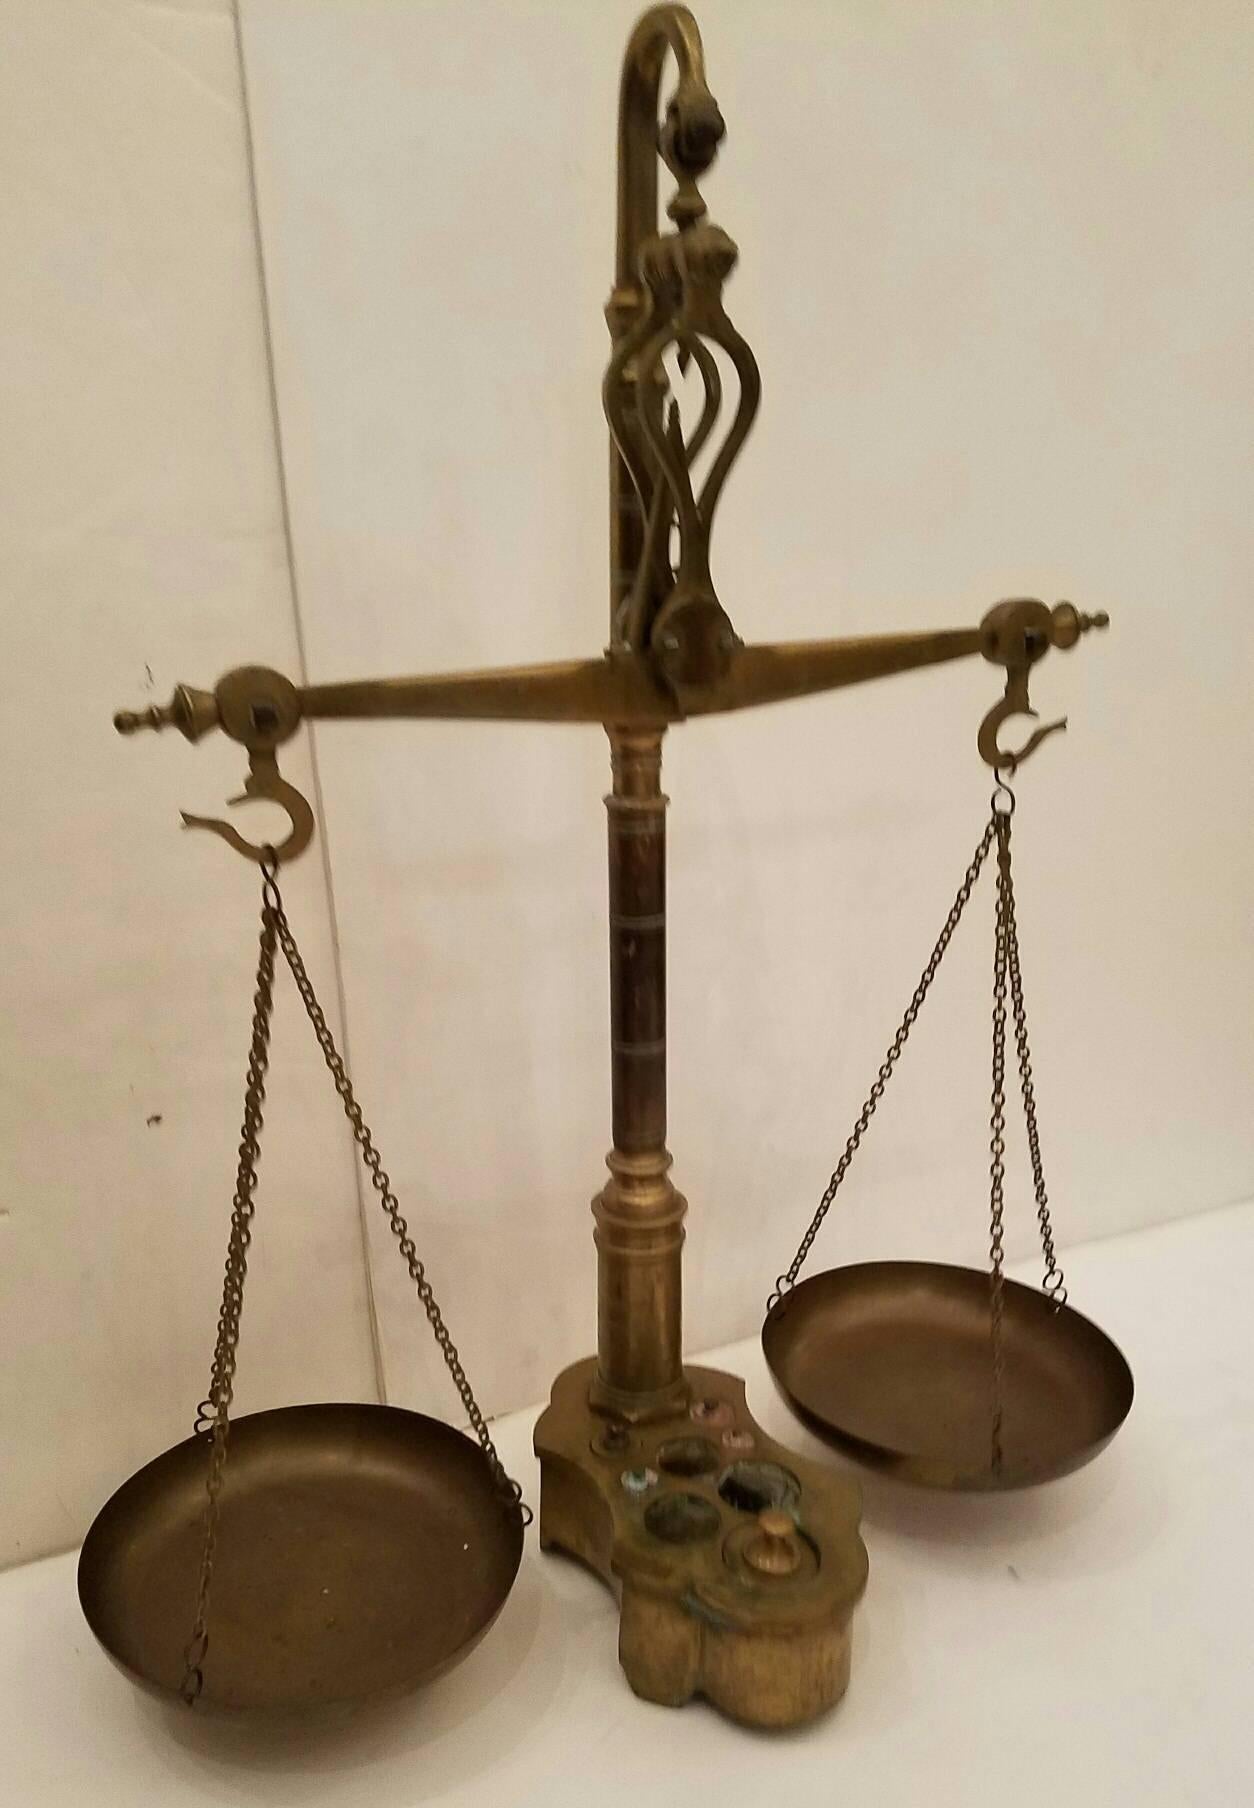 Antique Brass Balance or Beam Scale In Good Condition For Sale In Miami, FL